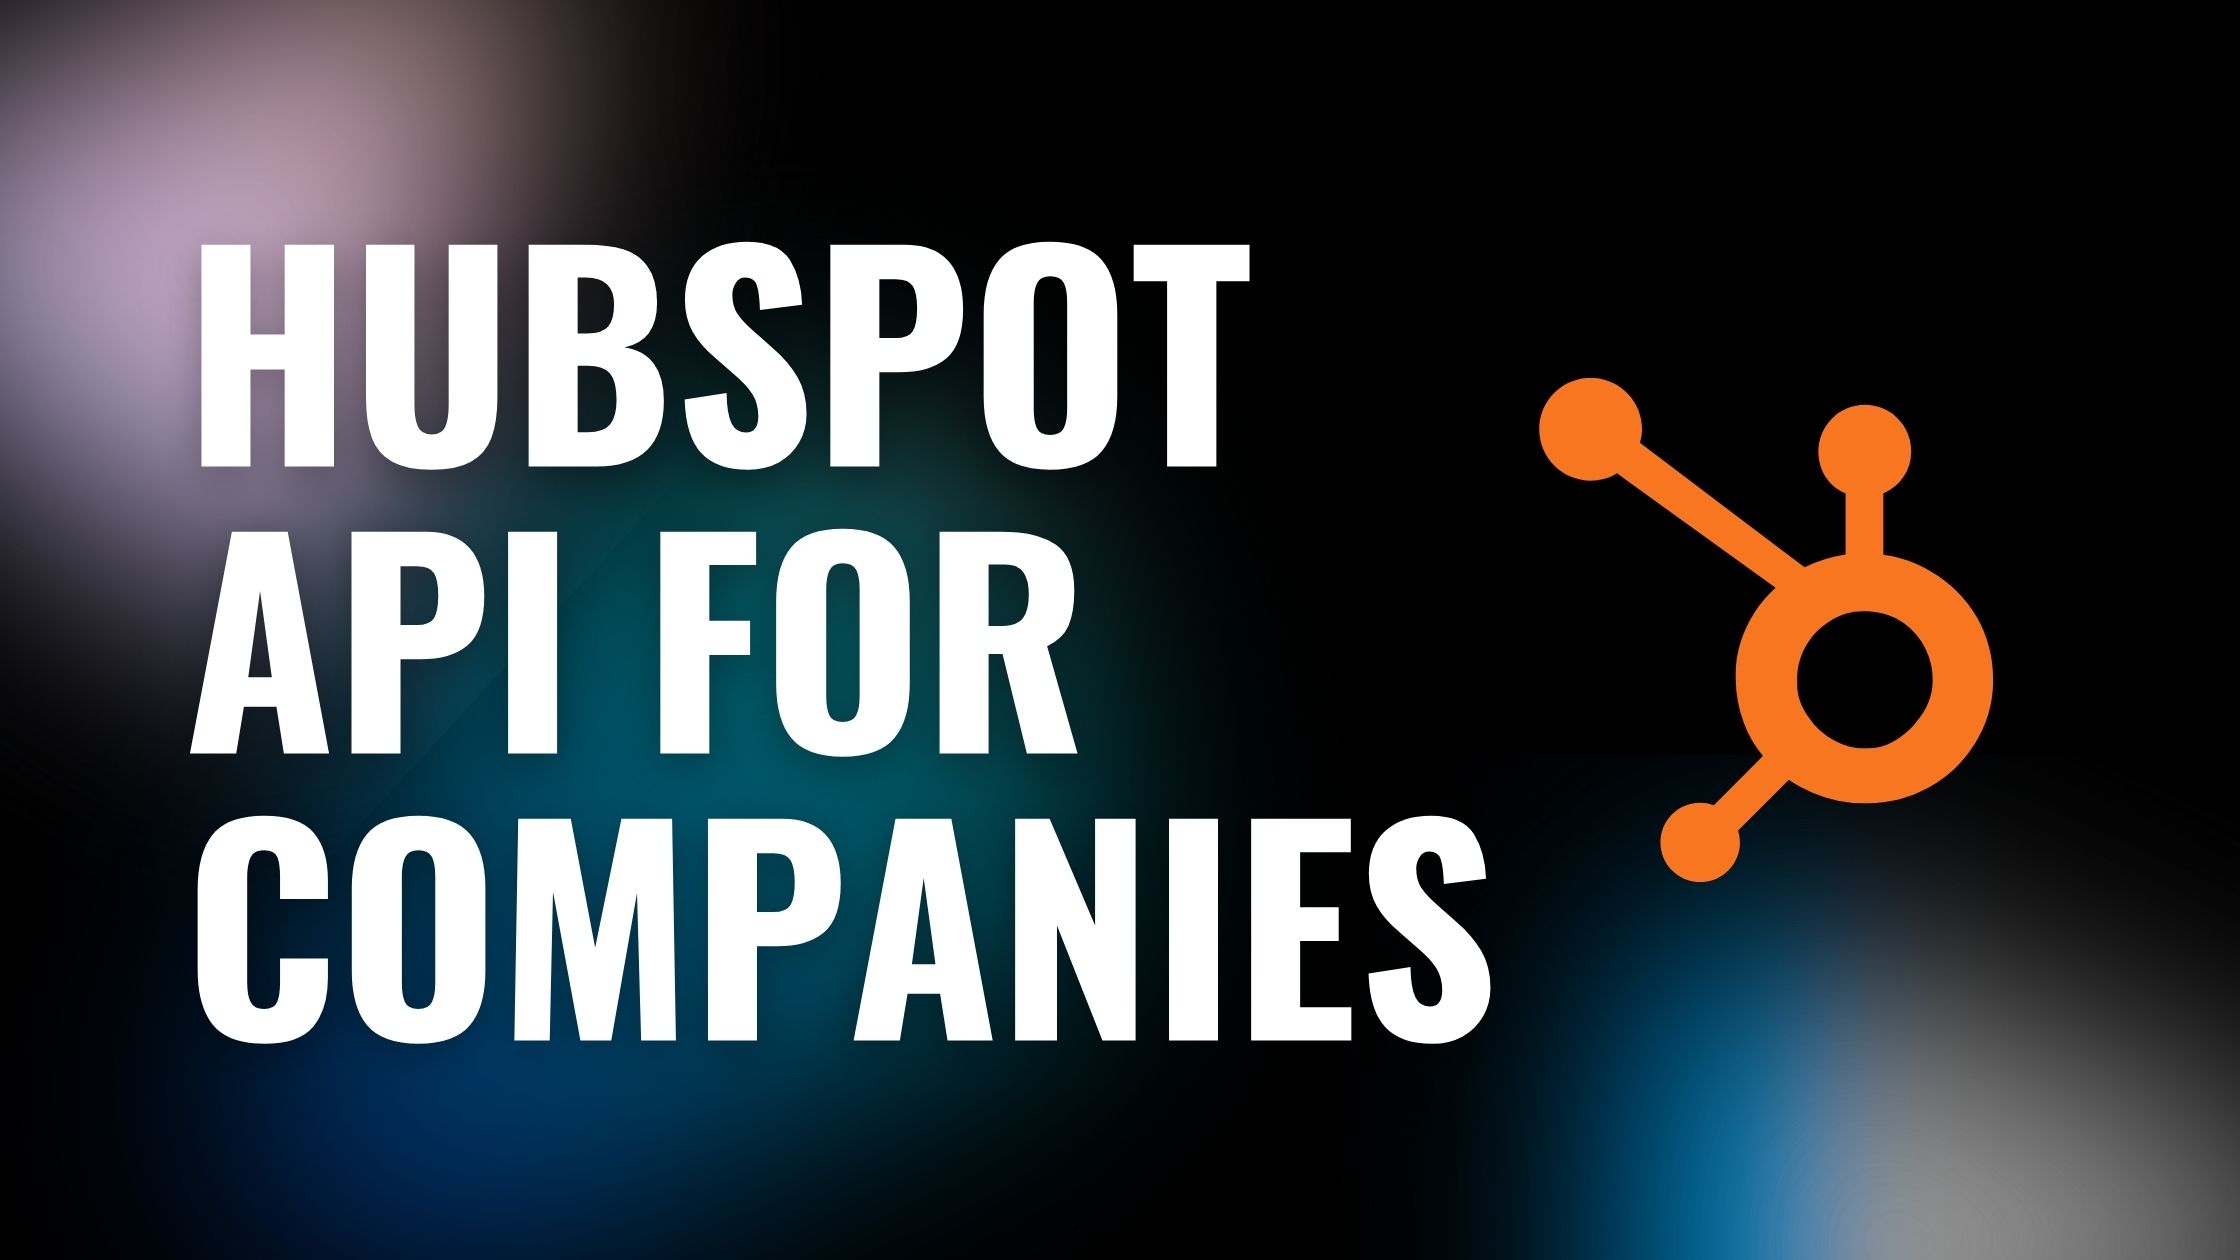 How To "Get" Companies From HubSpot Using C#